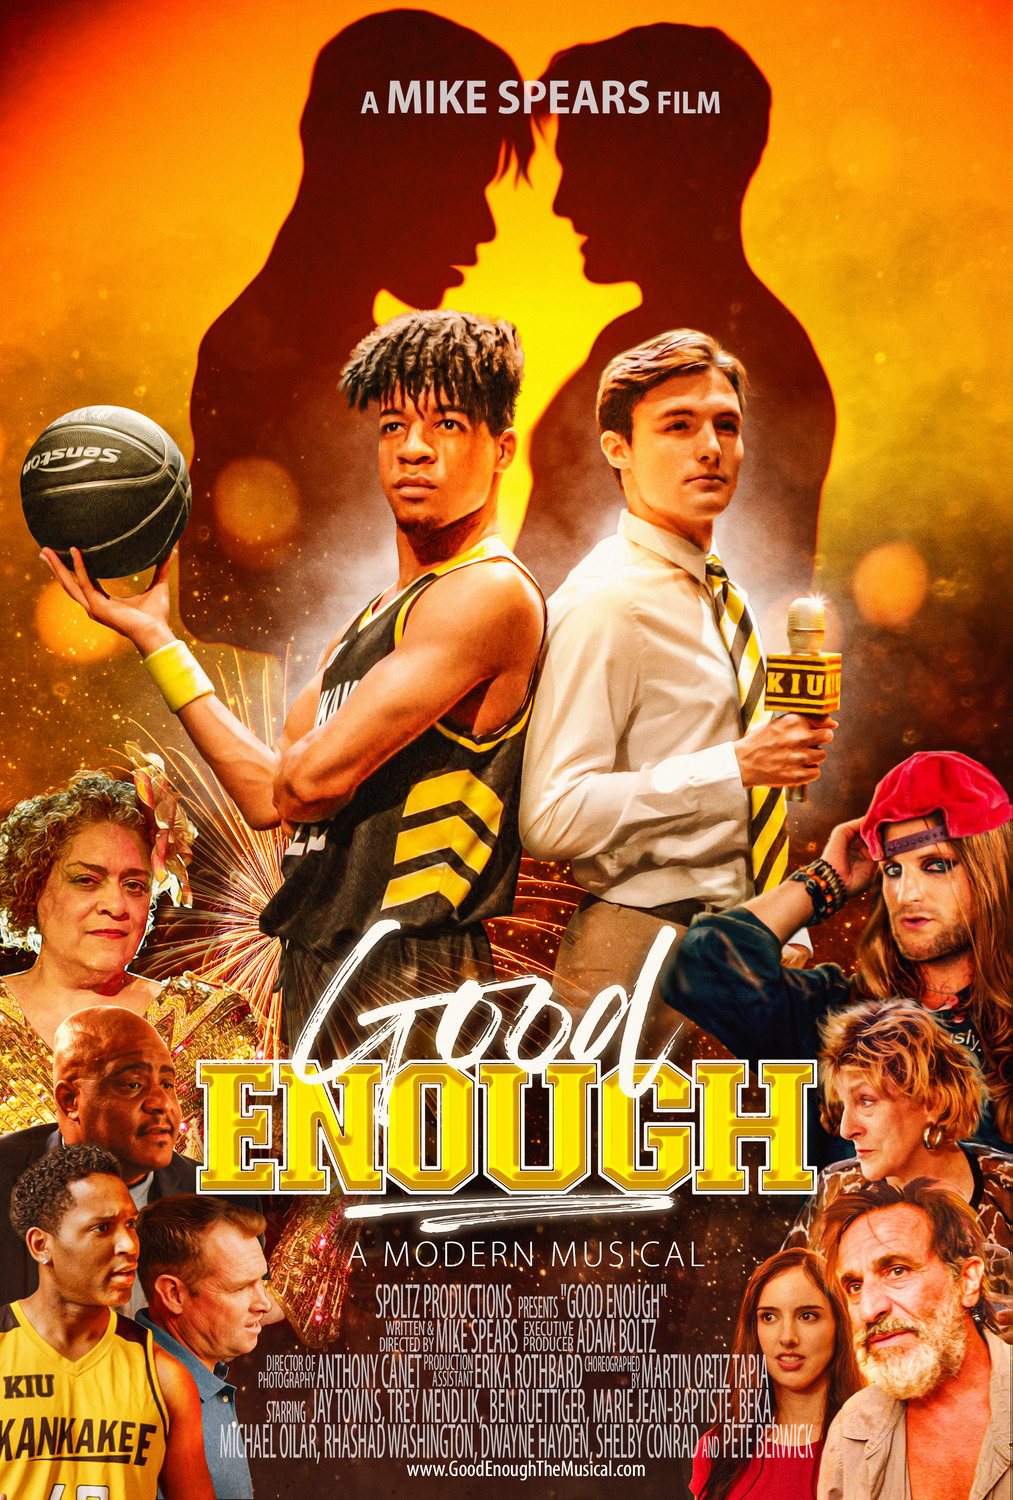 Extra Large Movie Poster Image for Good Enough: A Modern Musical 